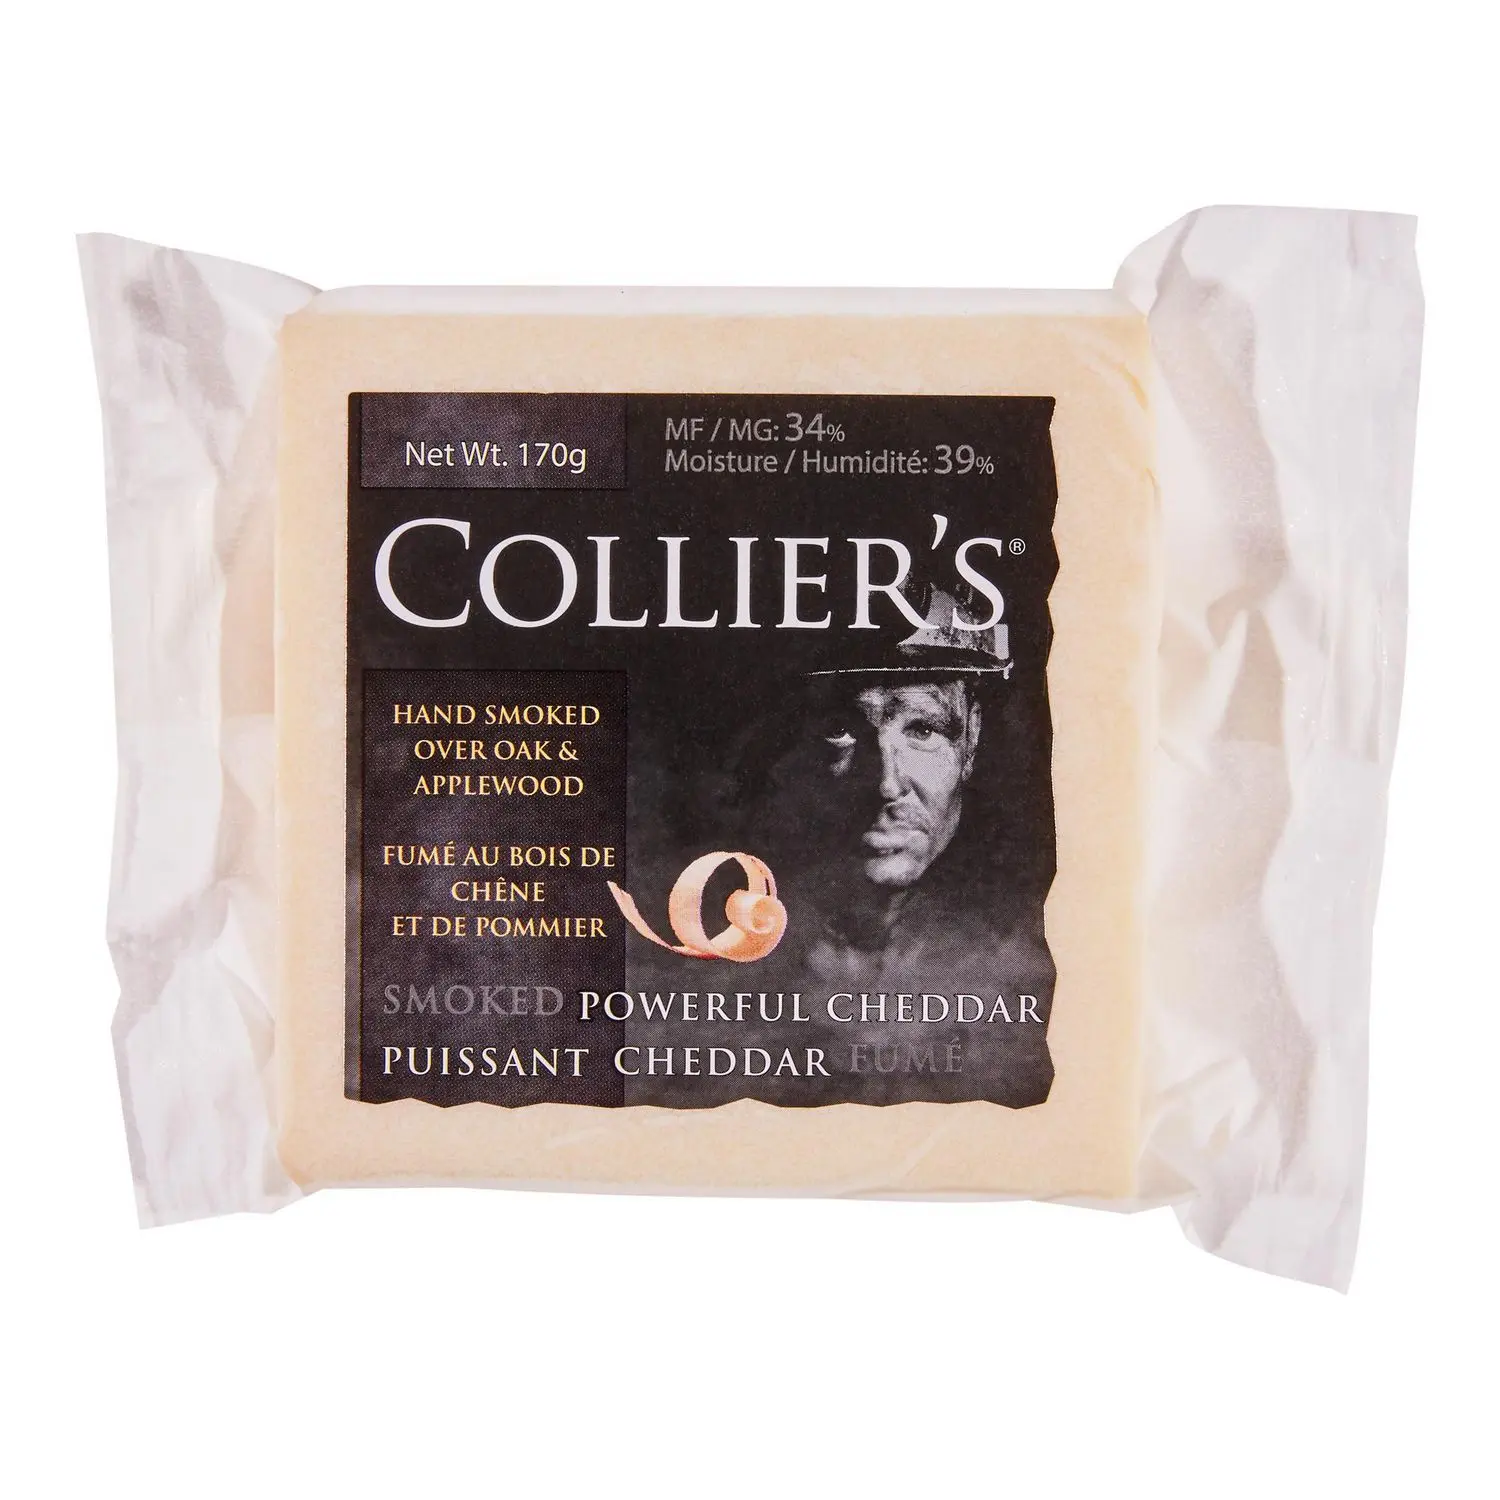 colliers smoked cheddar - Where is Colliers Cheddar made